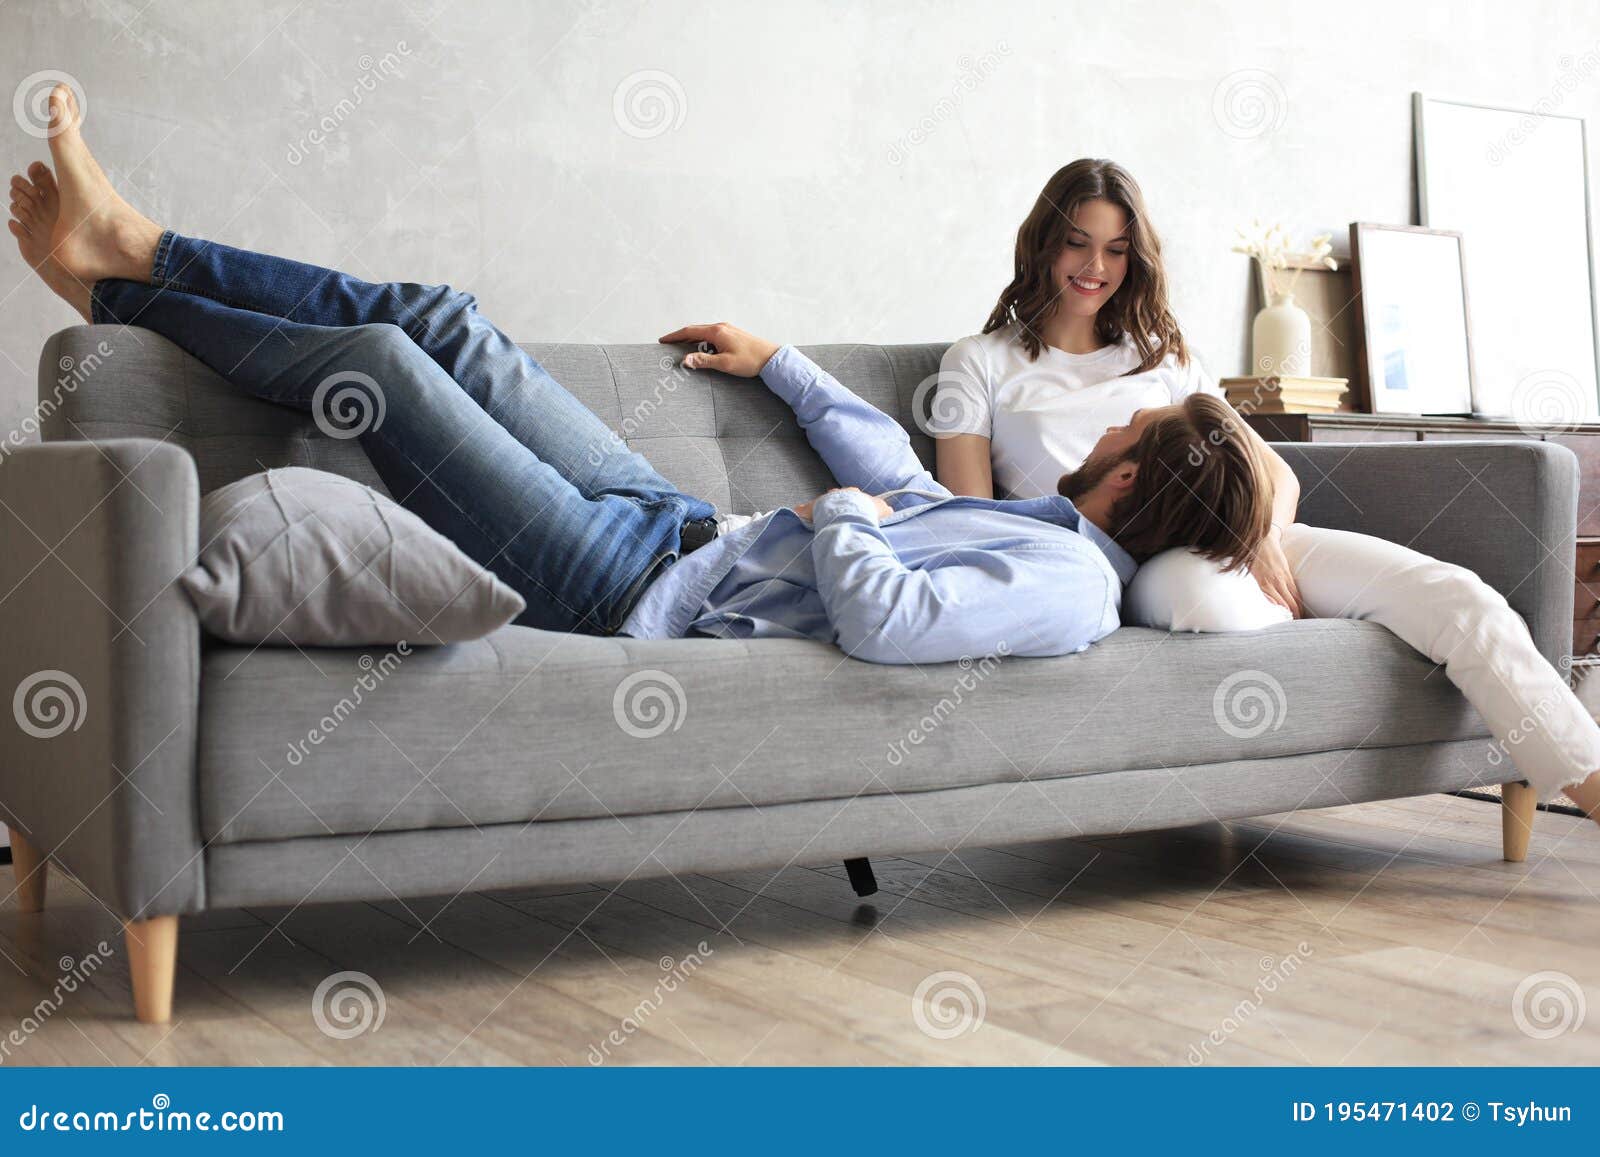 young loving couple relaxing on sofa together, husband lying on wife legs resting on couch